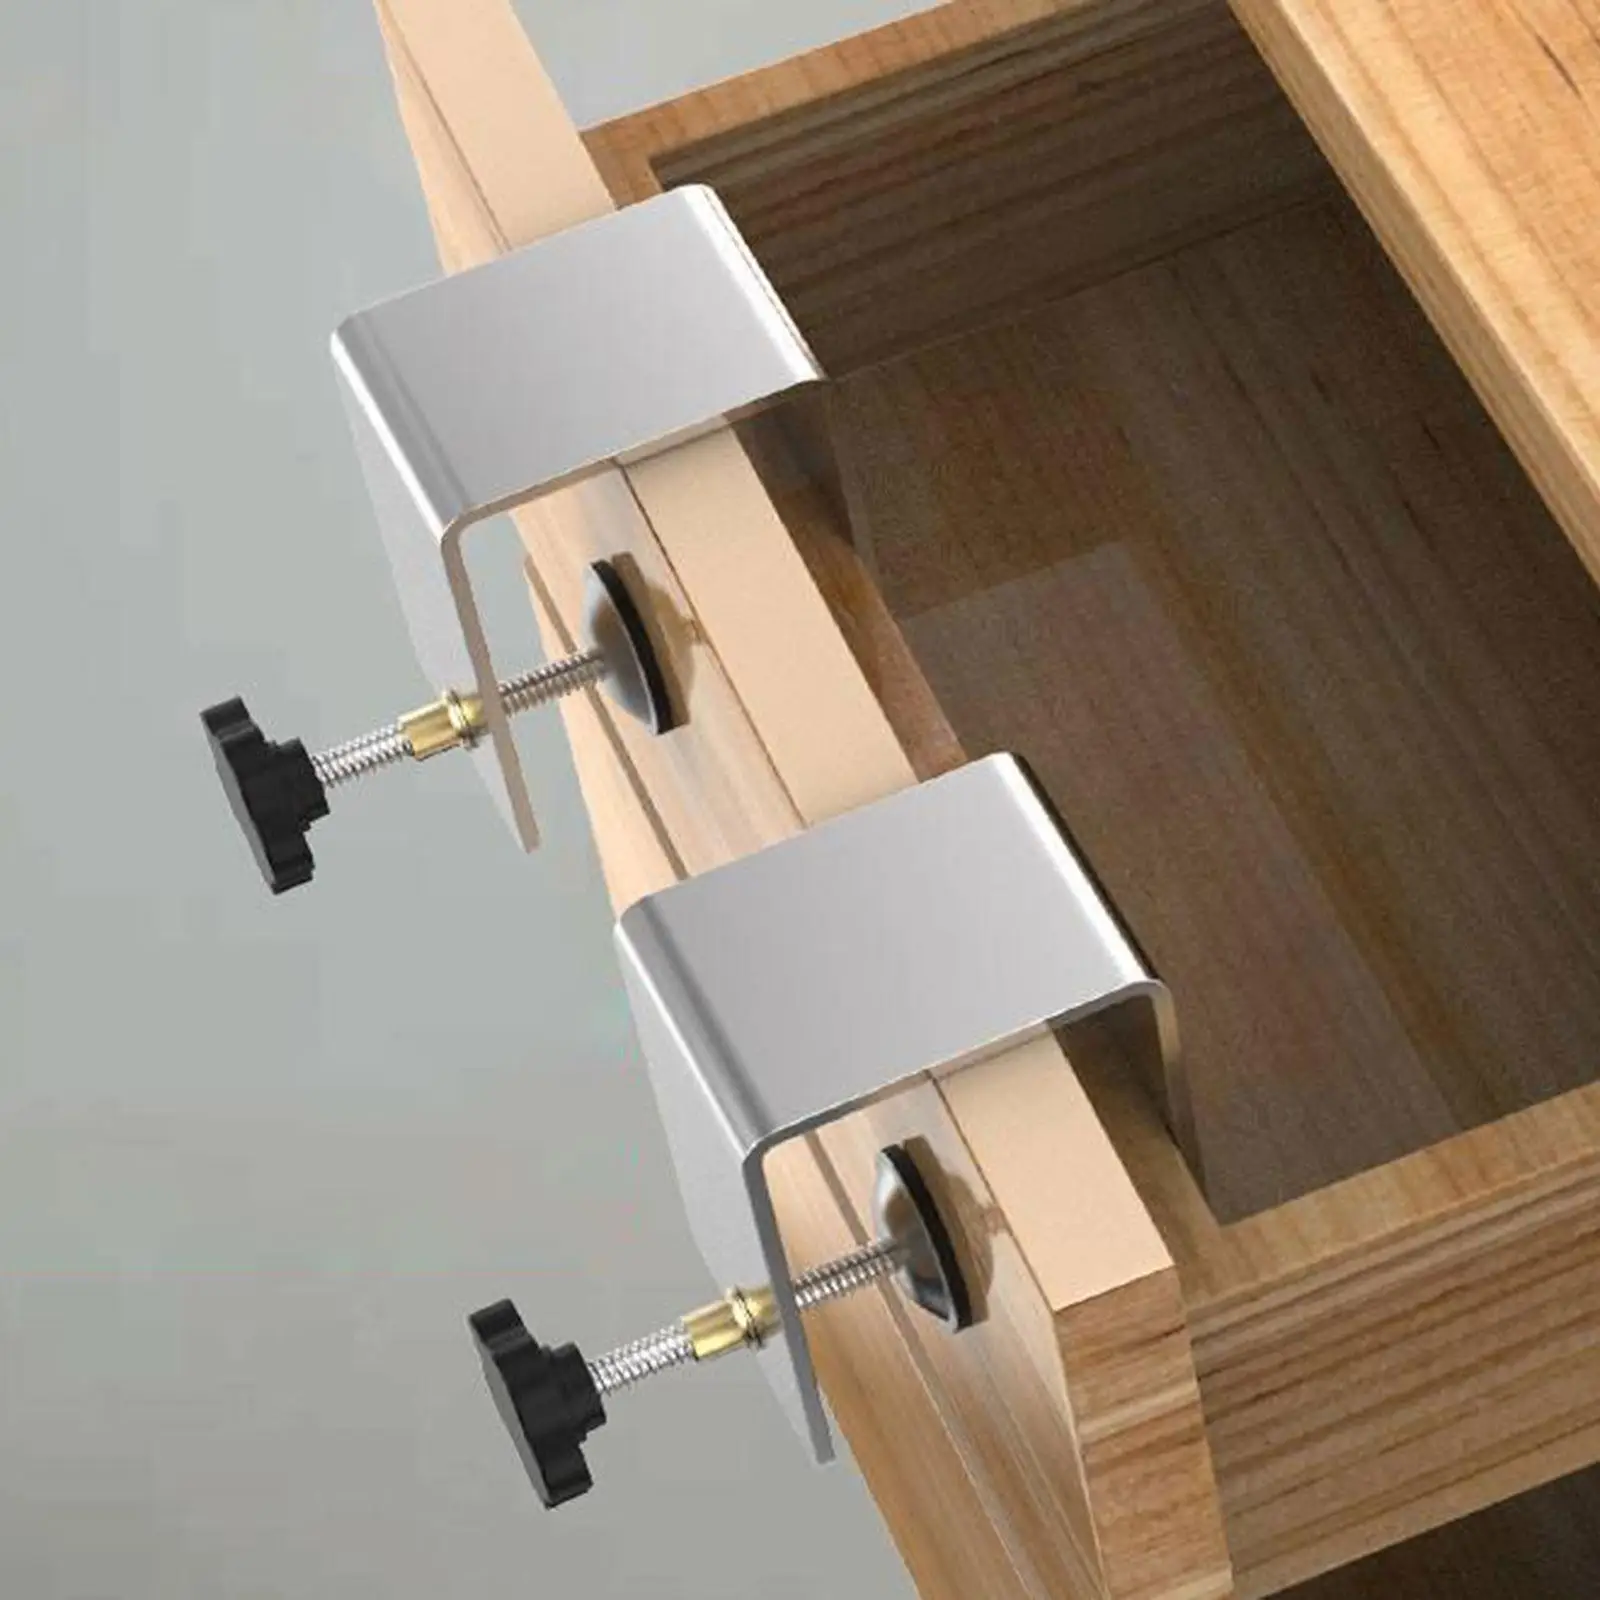 2x Woodworking Clamp Hardware Jig Universal Fixator Drawer Front Clamps for Cloakroom Homes Easy Fast Install Mounting Dresser